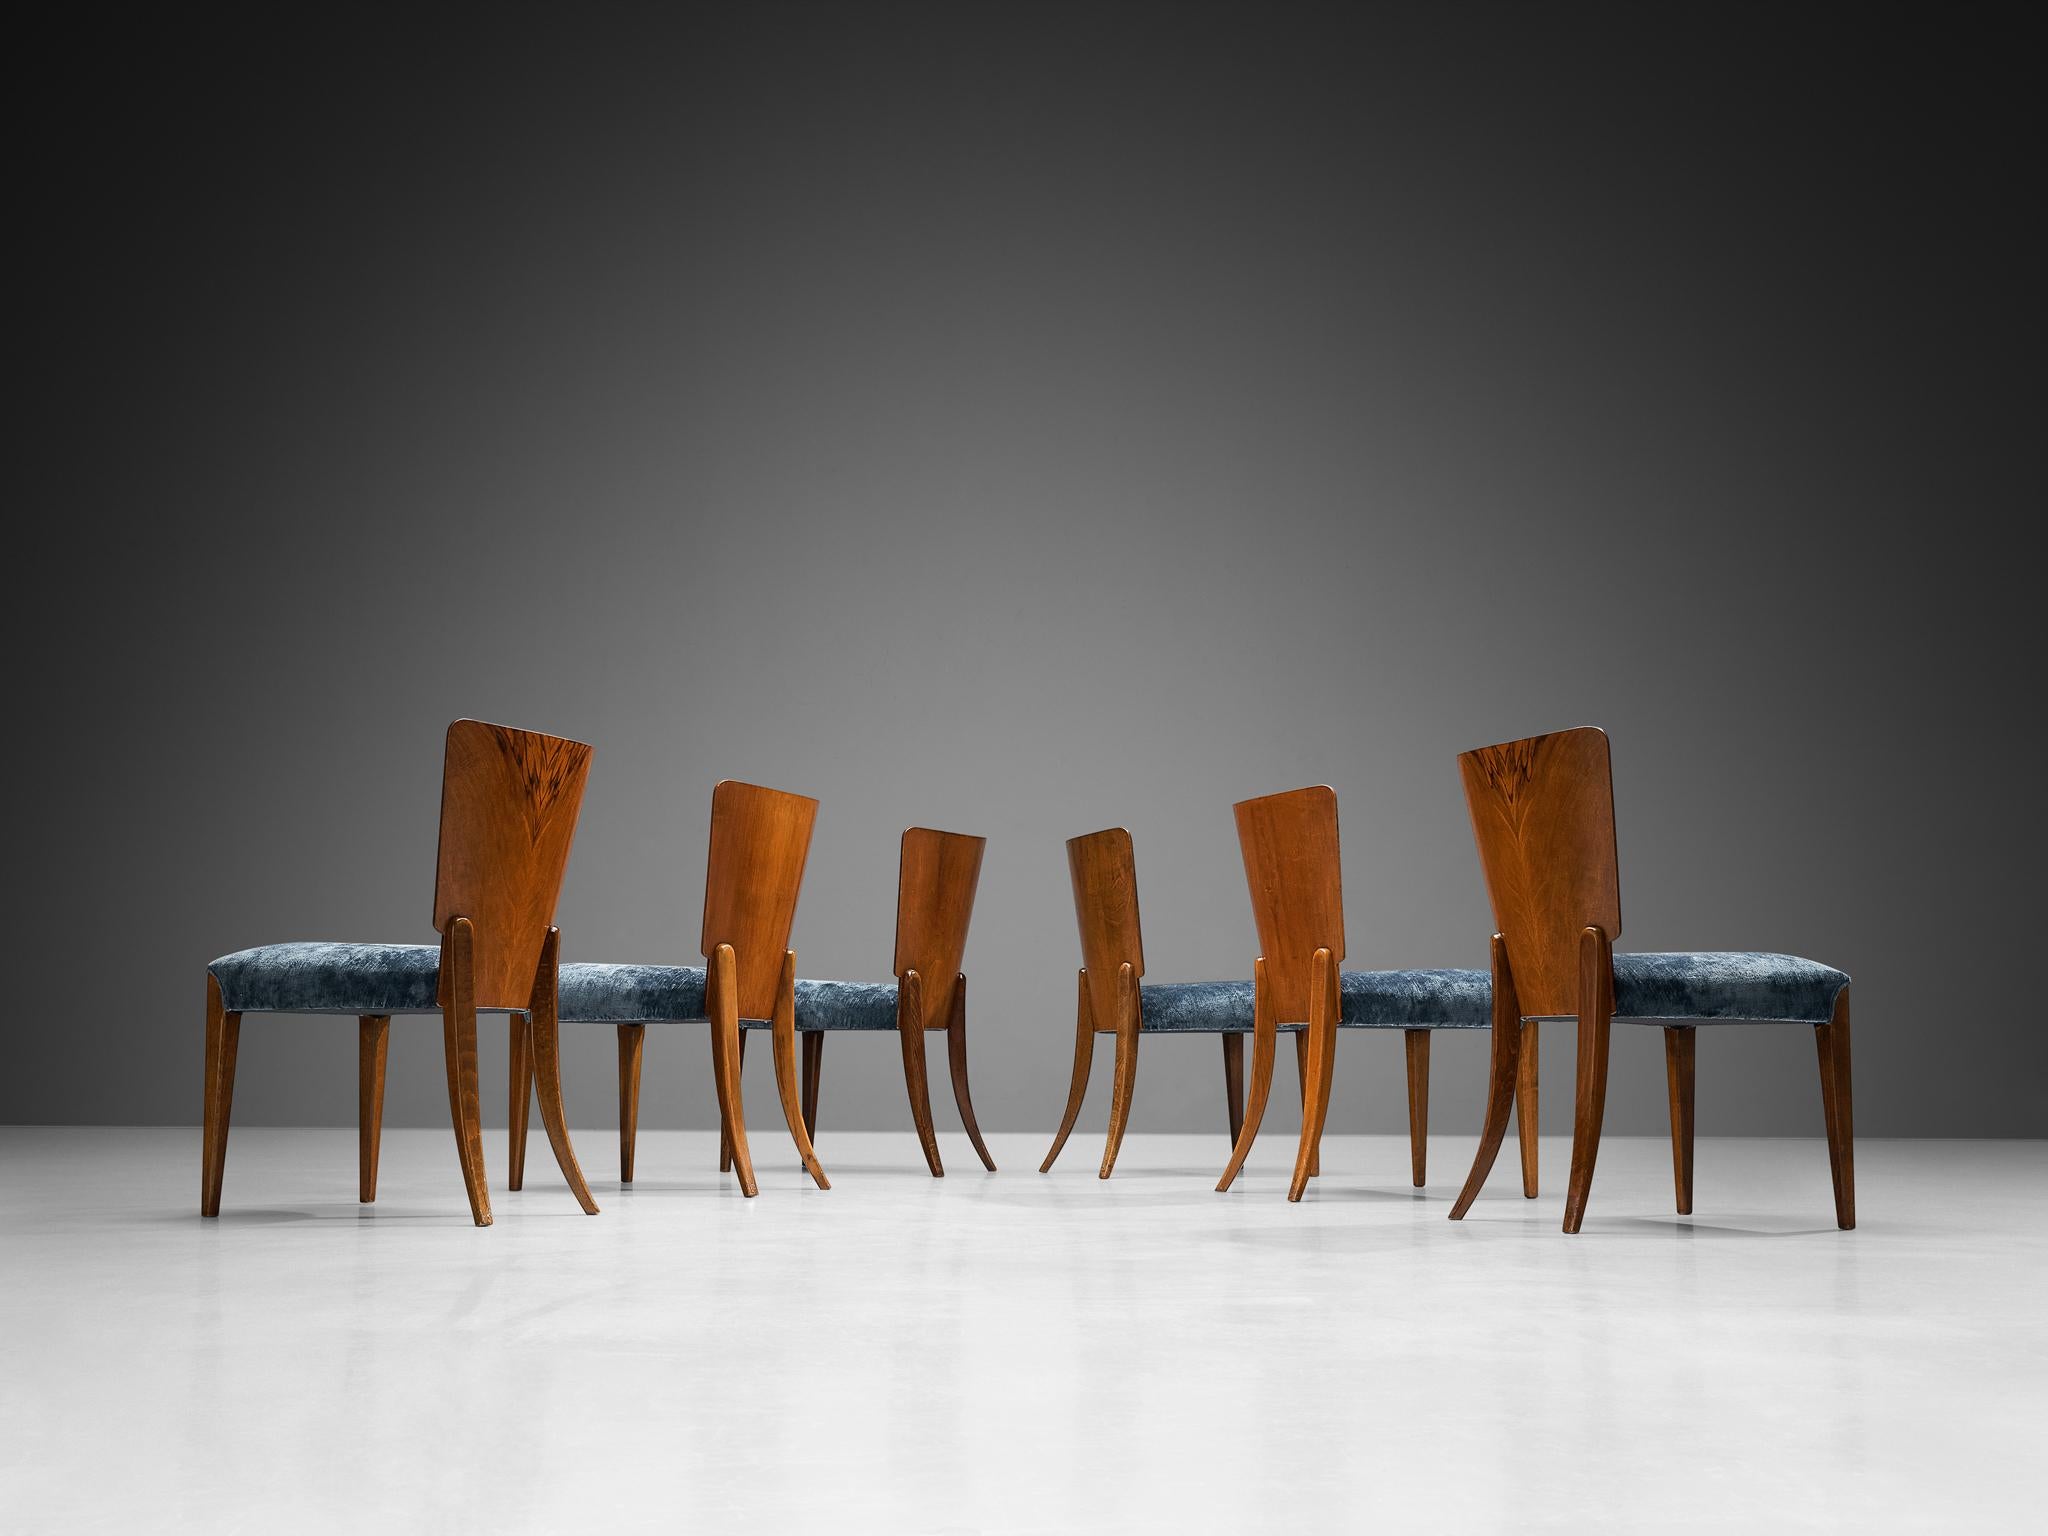 Set of six dining chairs, walnut, velvet, Czech Republic, 1930s

These sophisticated and elegant Art Deco dining chairs were designed in the 1930s. The backrest and legs of the chairs are executed in an enthralling walnut wood. The restored set of